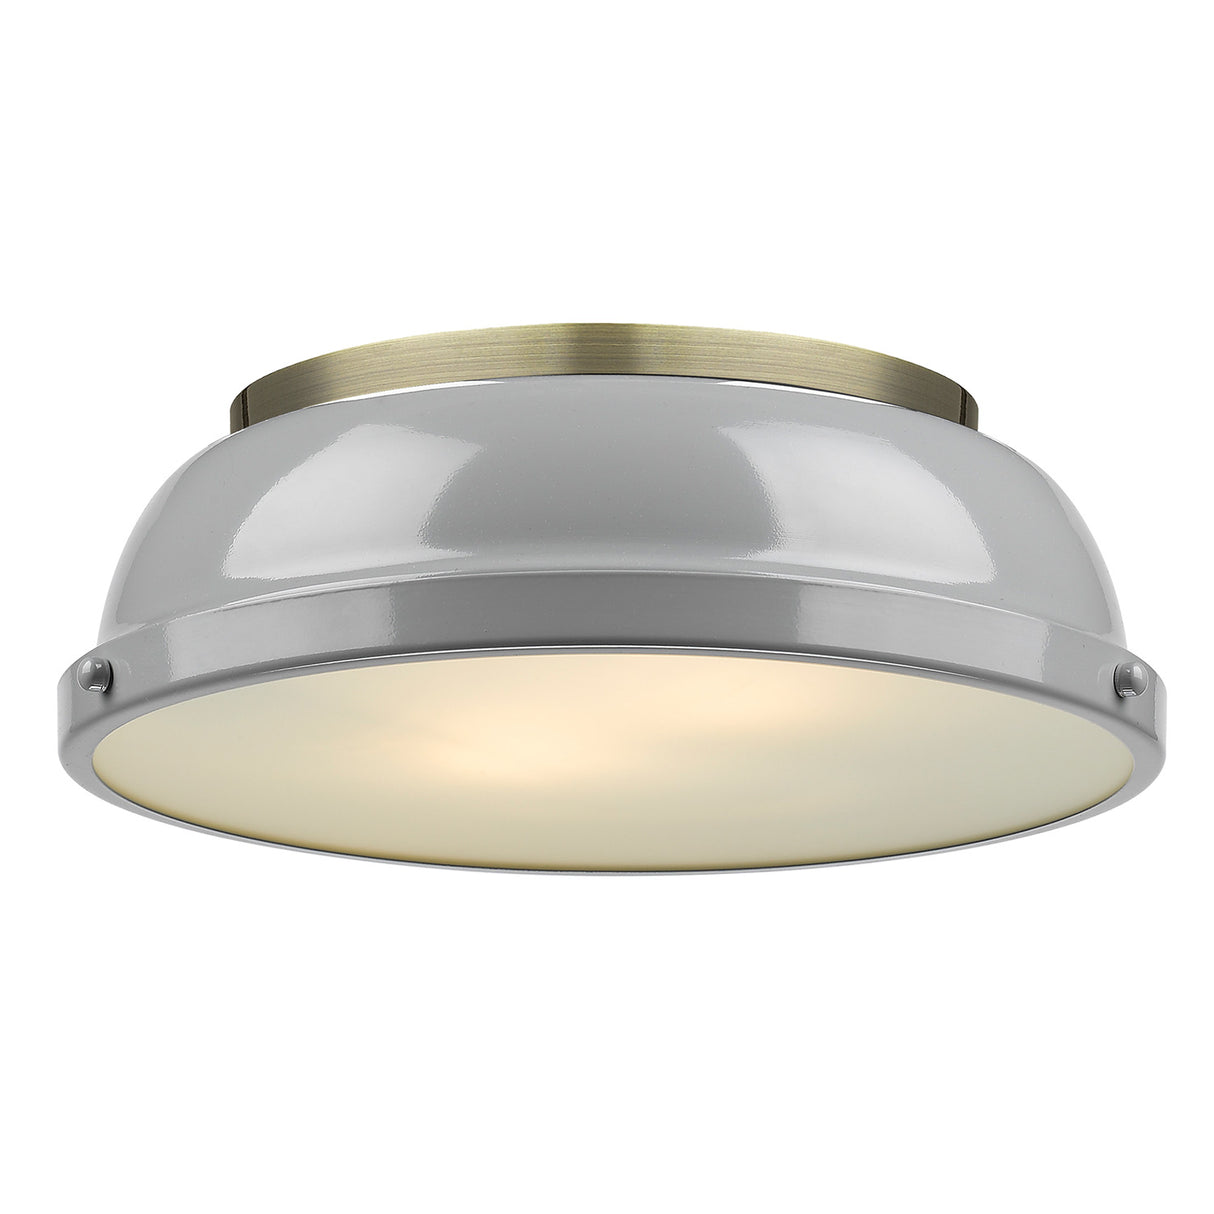 Duncan 14" Flush Mount in Aged Brass with a Gray Shade